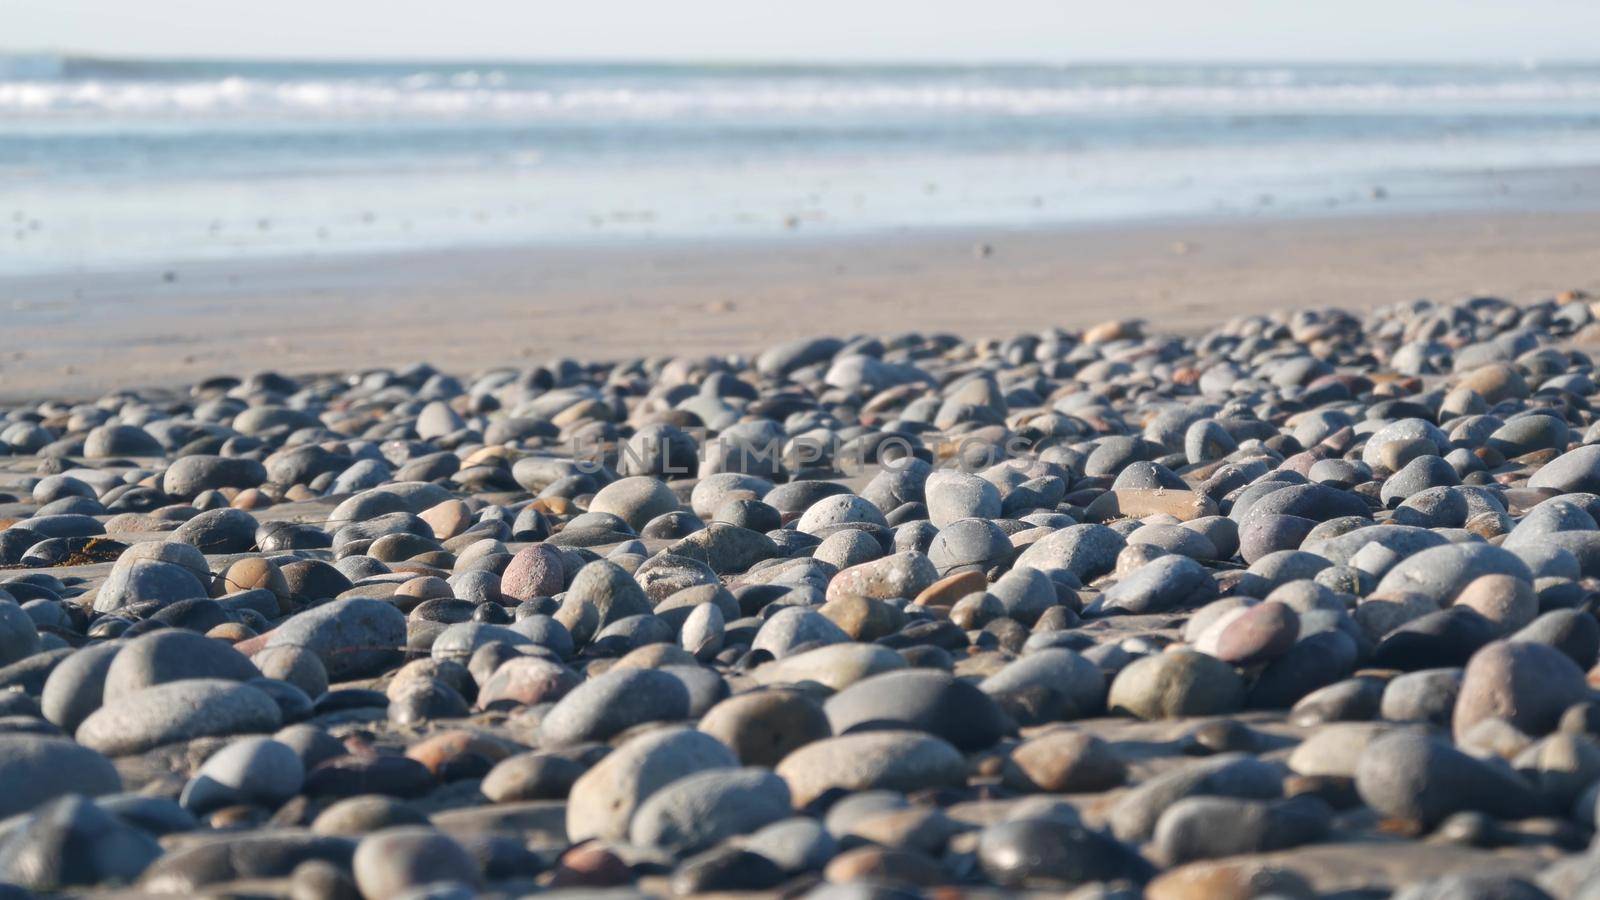 Pebble rocks on sandy beach by ocean sea water waves, round smooth stones or boulders low angle view in soft focus. California coast vacations aesthetic, USA. Seascape natural background with bokeh.